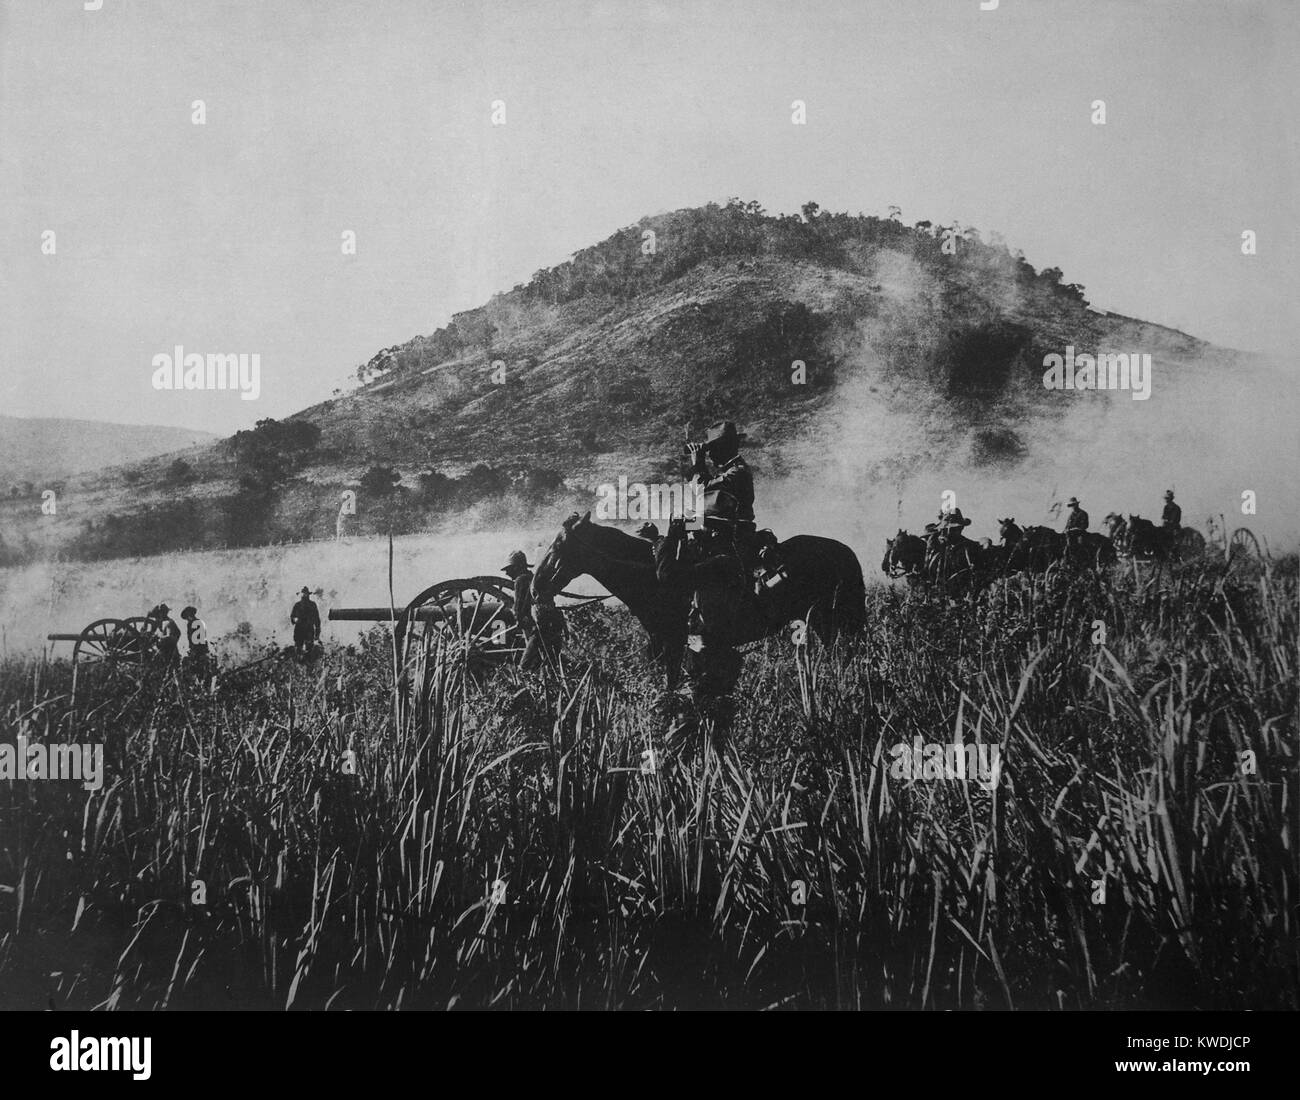 US artillery, shelling at Coamo, on August 9, 1898, while advancing into Puerto Rican interior. The American invaders opposition in inconclusive fighting during the Spanish American War (BSLOC 2017 10 53) Stock Photo